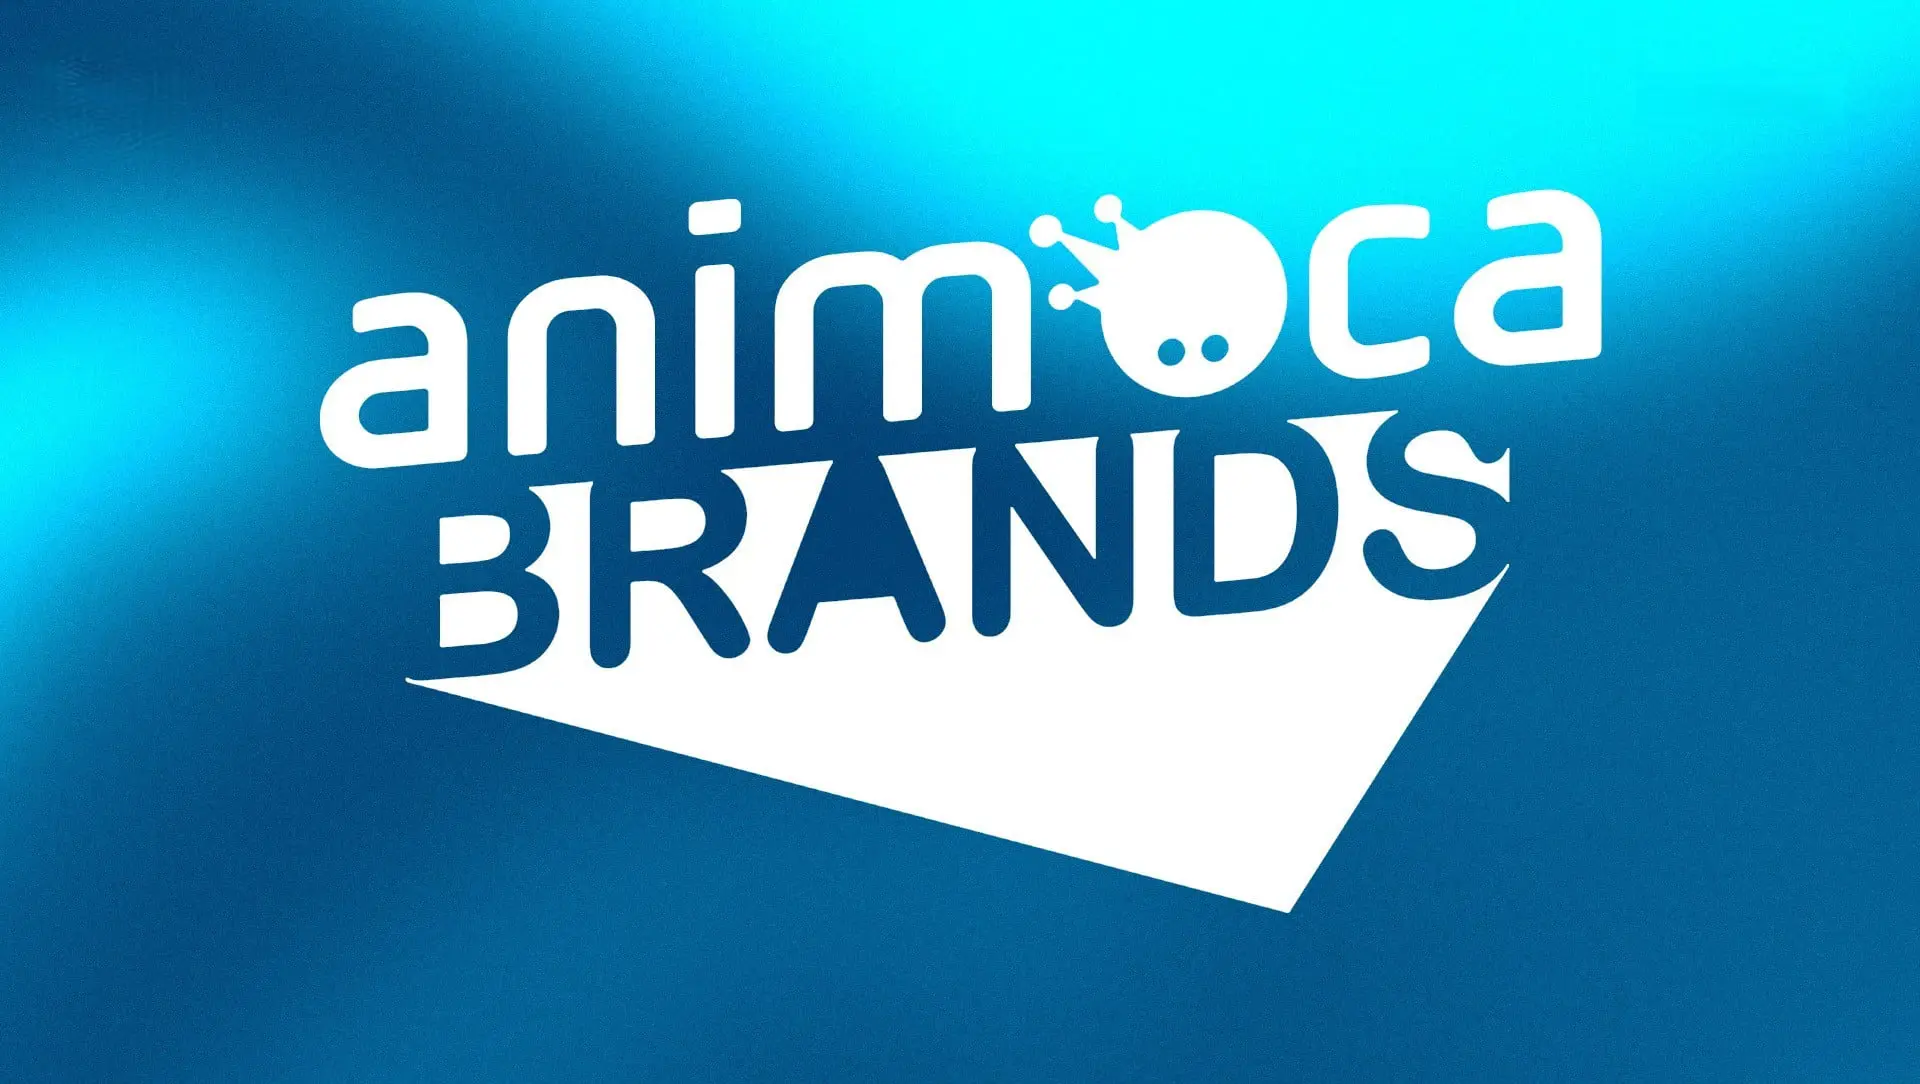 animoca brands Animoca Brands announces the company has completed a capital raise of  million. Back in January 2022, the company raised 8 million at a  billion valuation. 